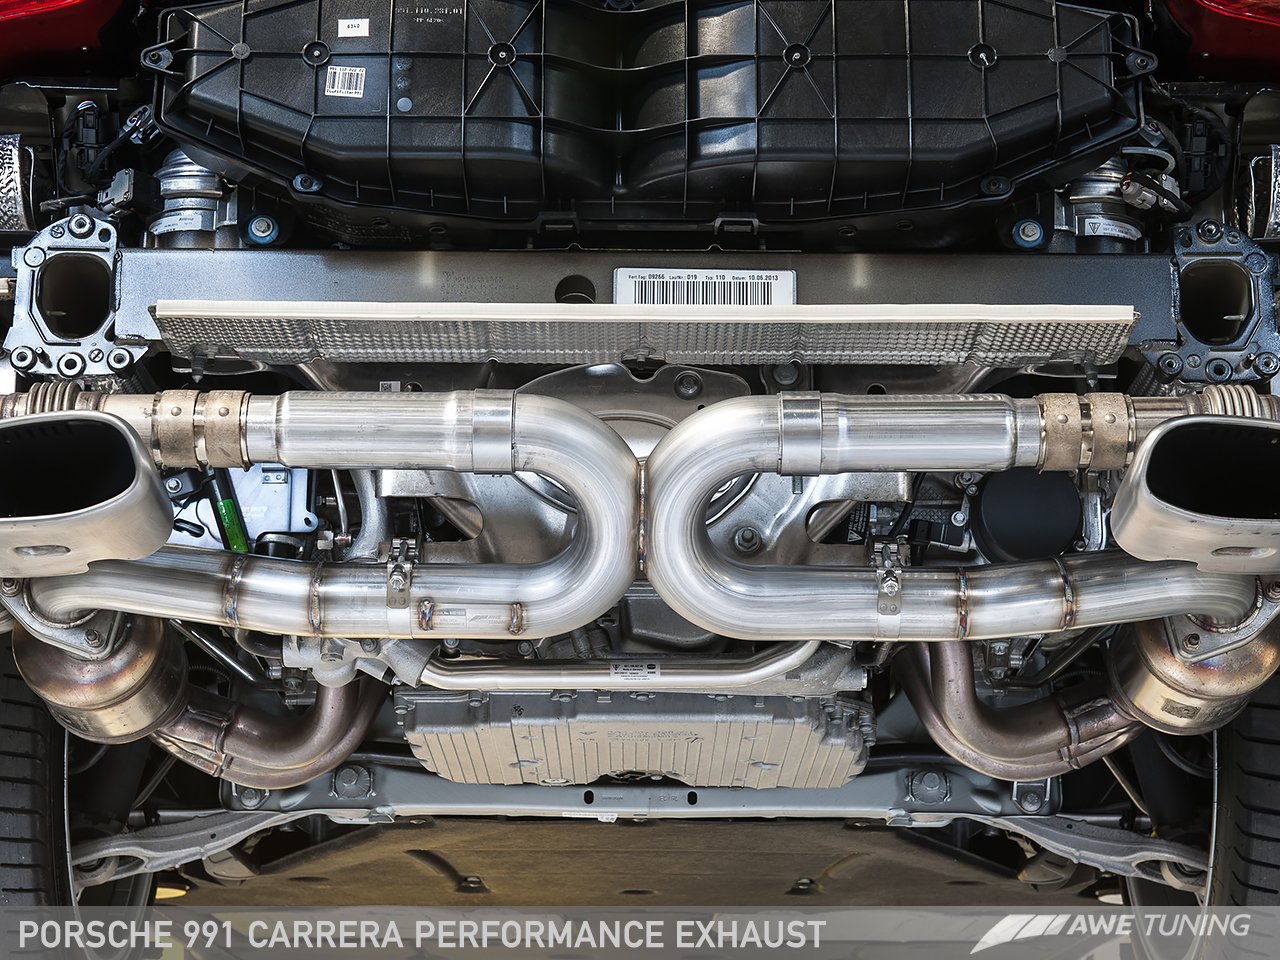 Performance Exhaust for 991 Carrera - Use Stock Tips